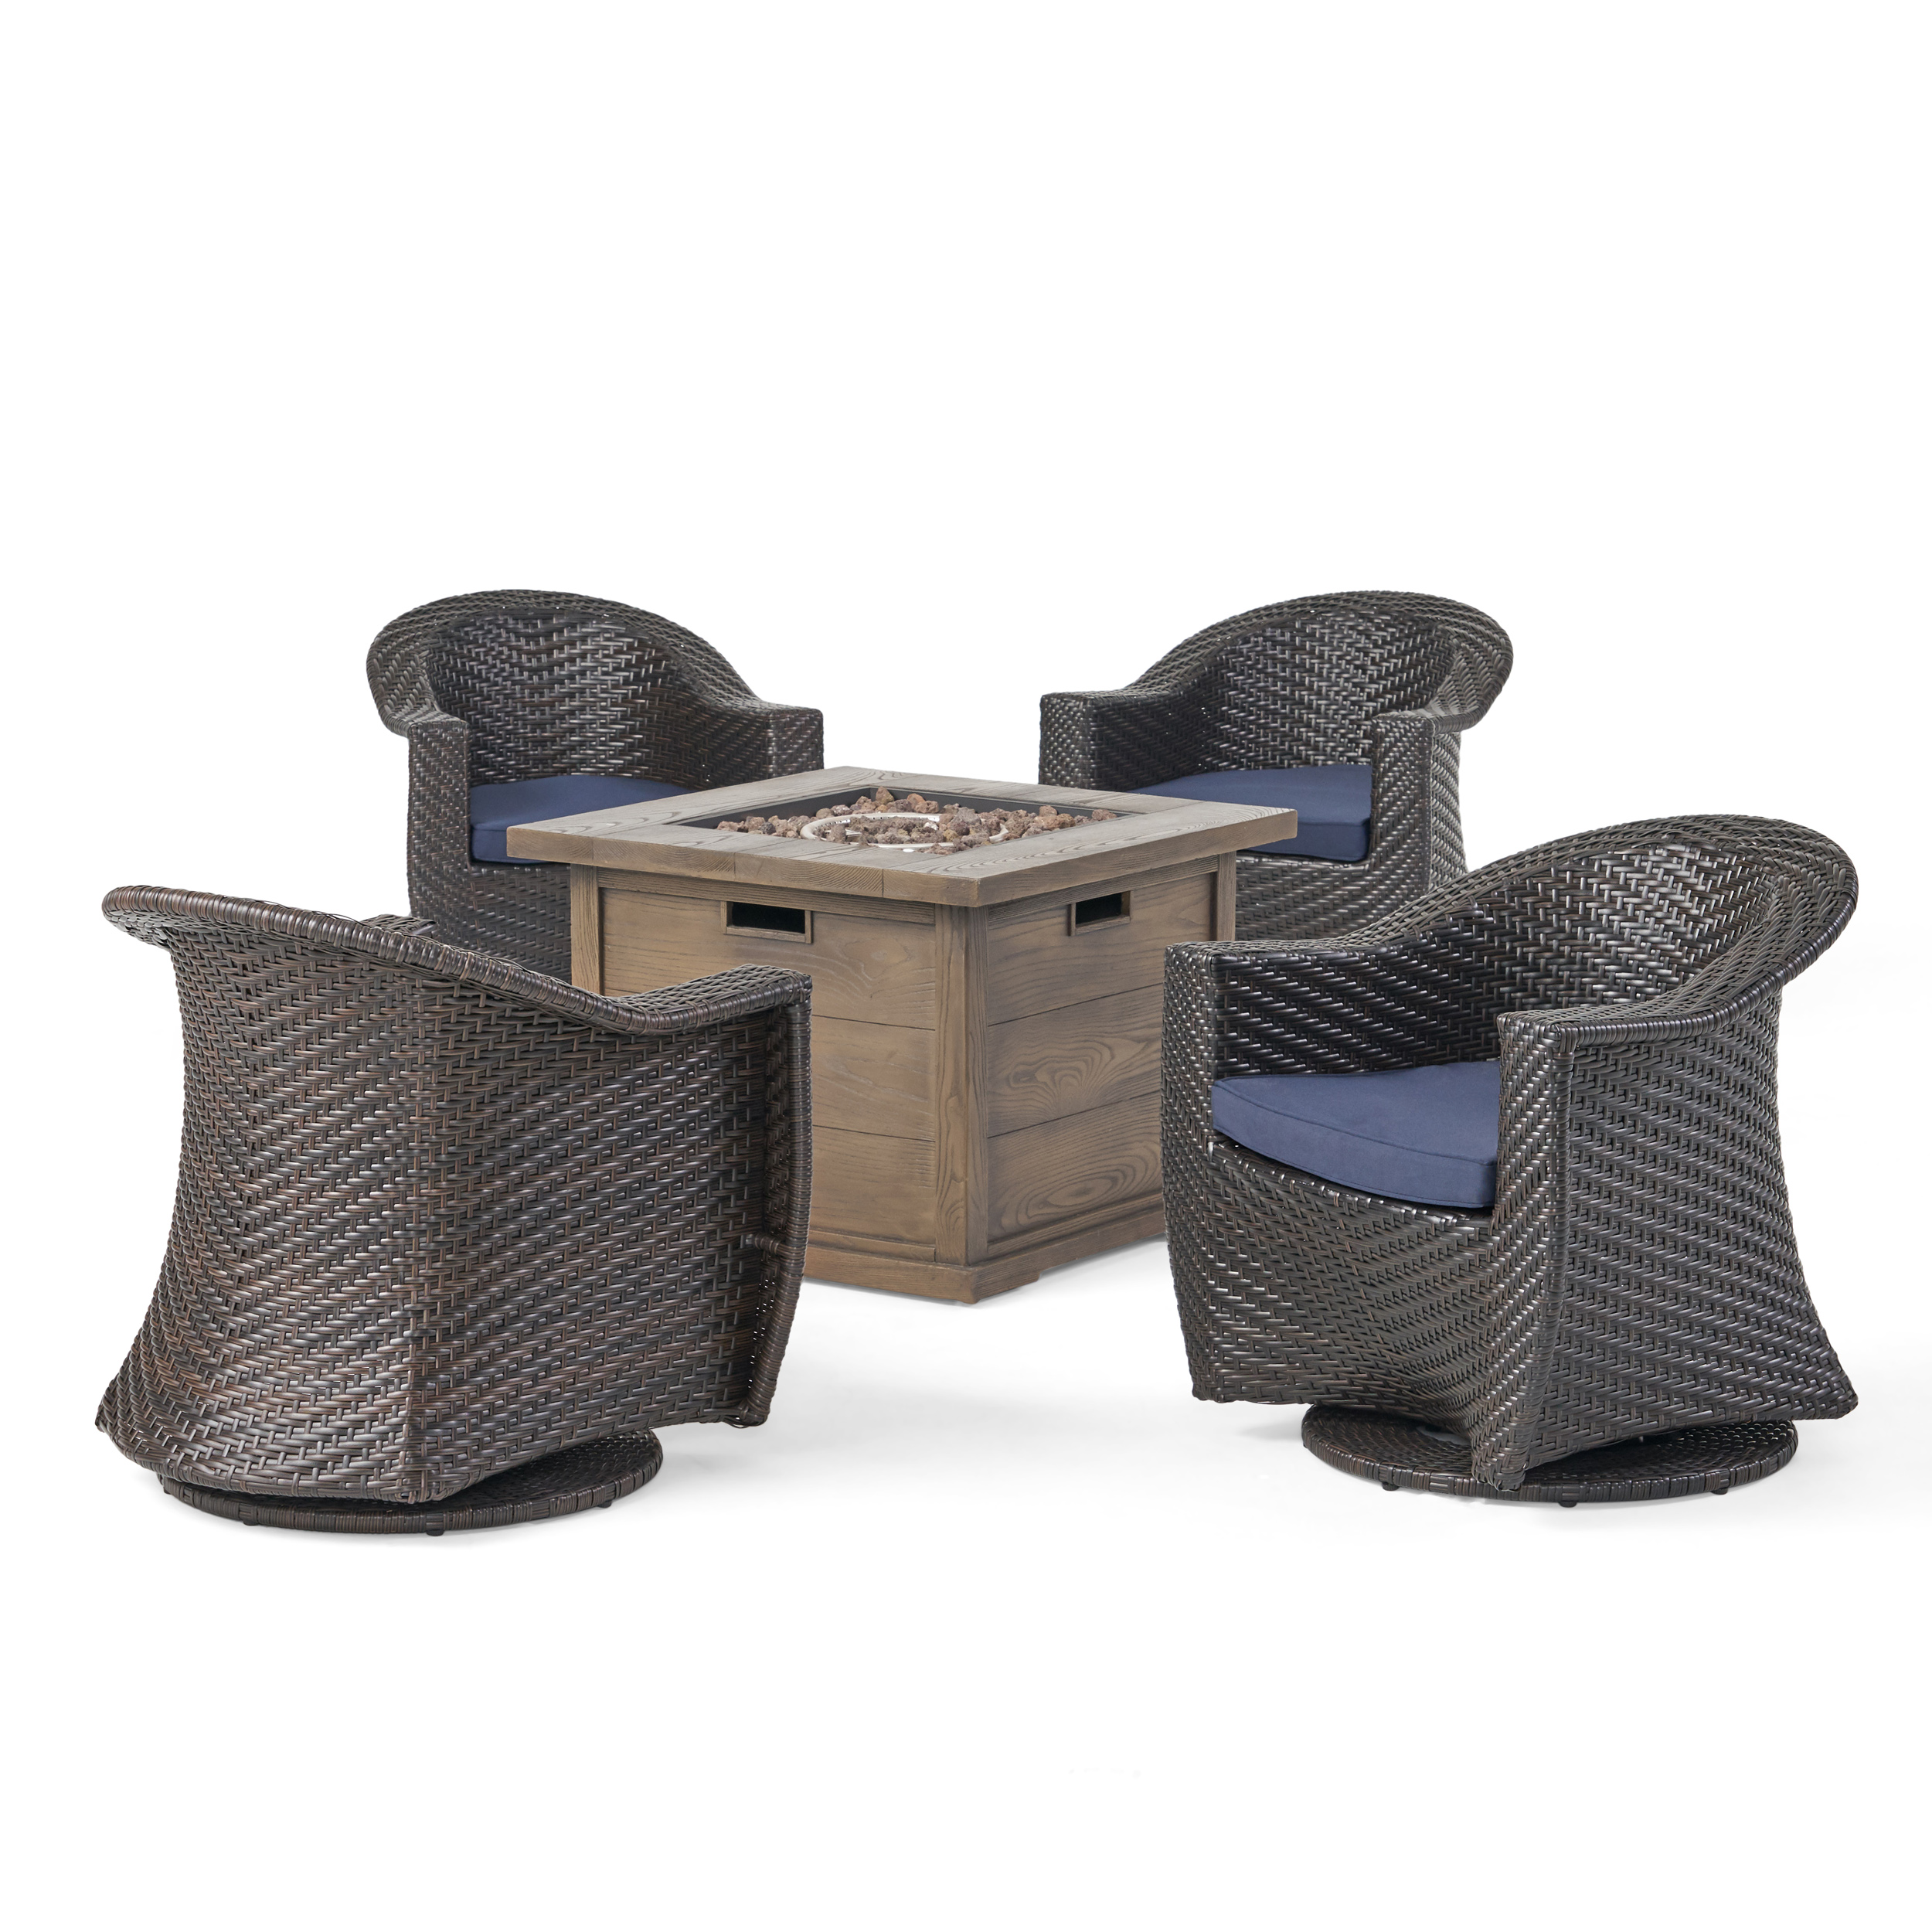 Celeste Patio Fire Pit Set, 4-Seater with Wicker Swivel Chairs, Multi-Brown, Navy Blue, Brown with Wood Design - image 2 of 10